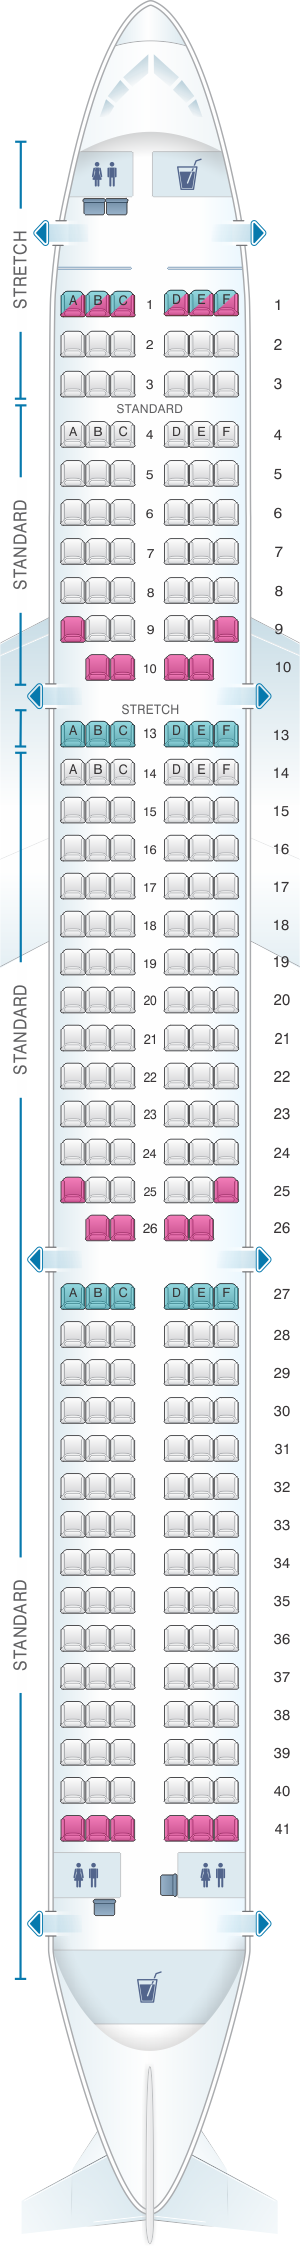 Seat map for Frontier Airlines Airbus A321 230pax